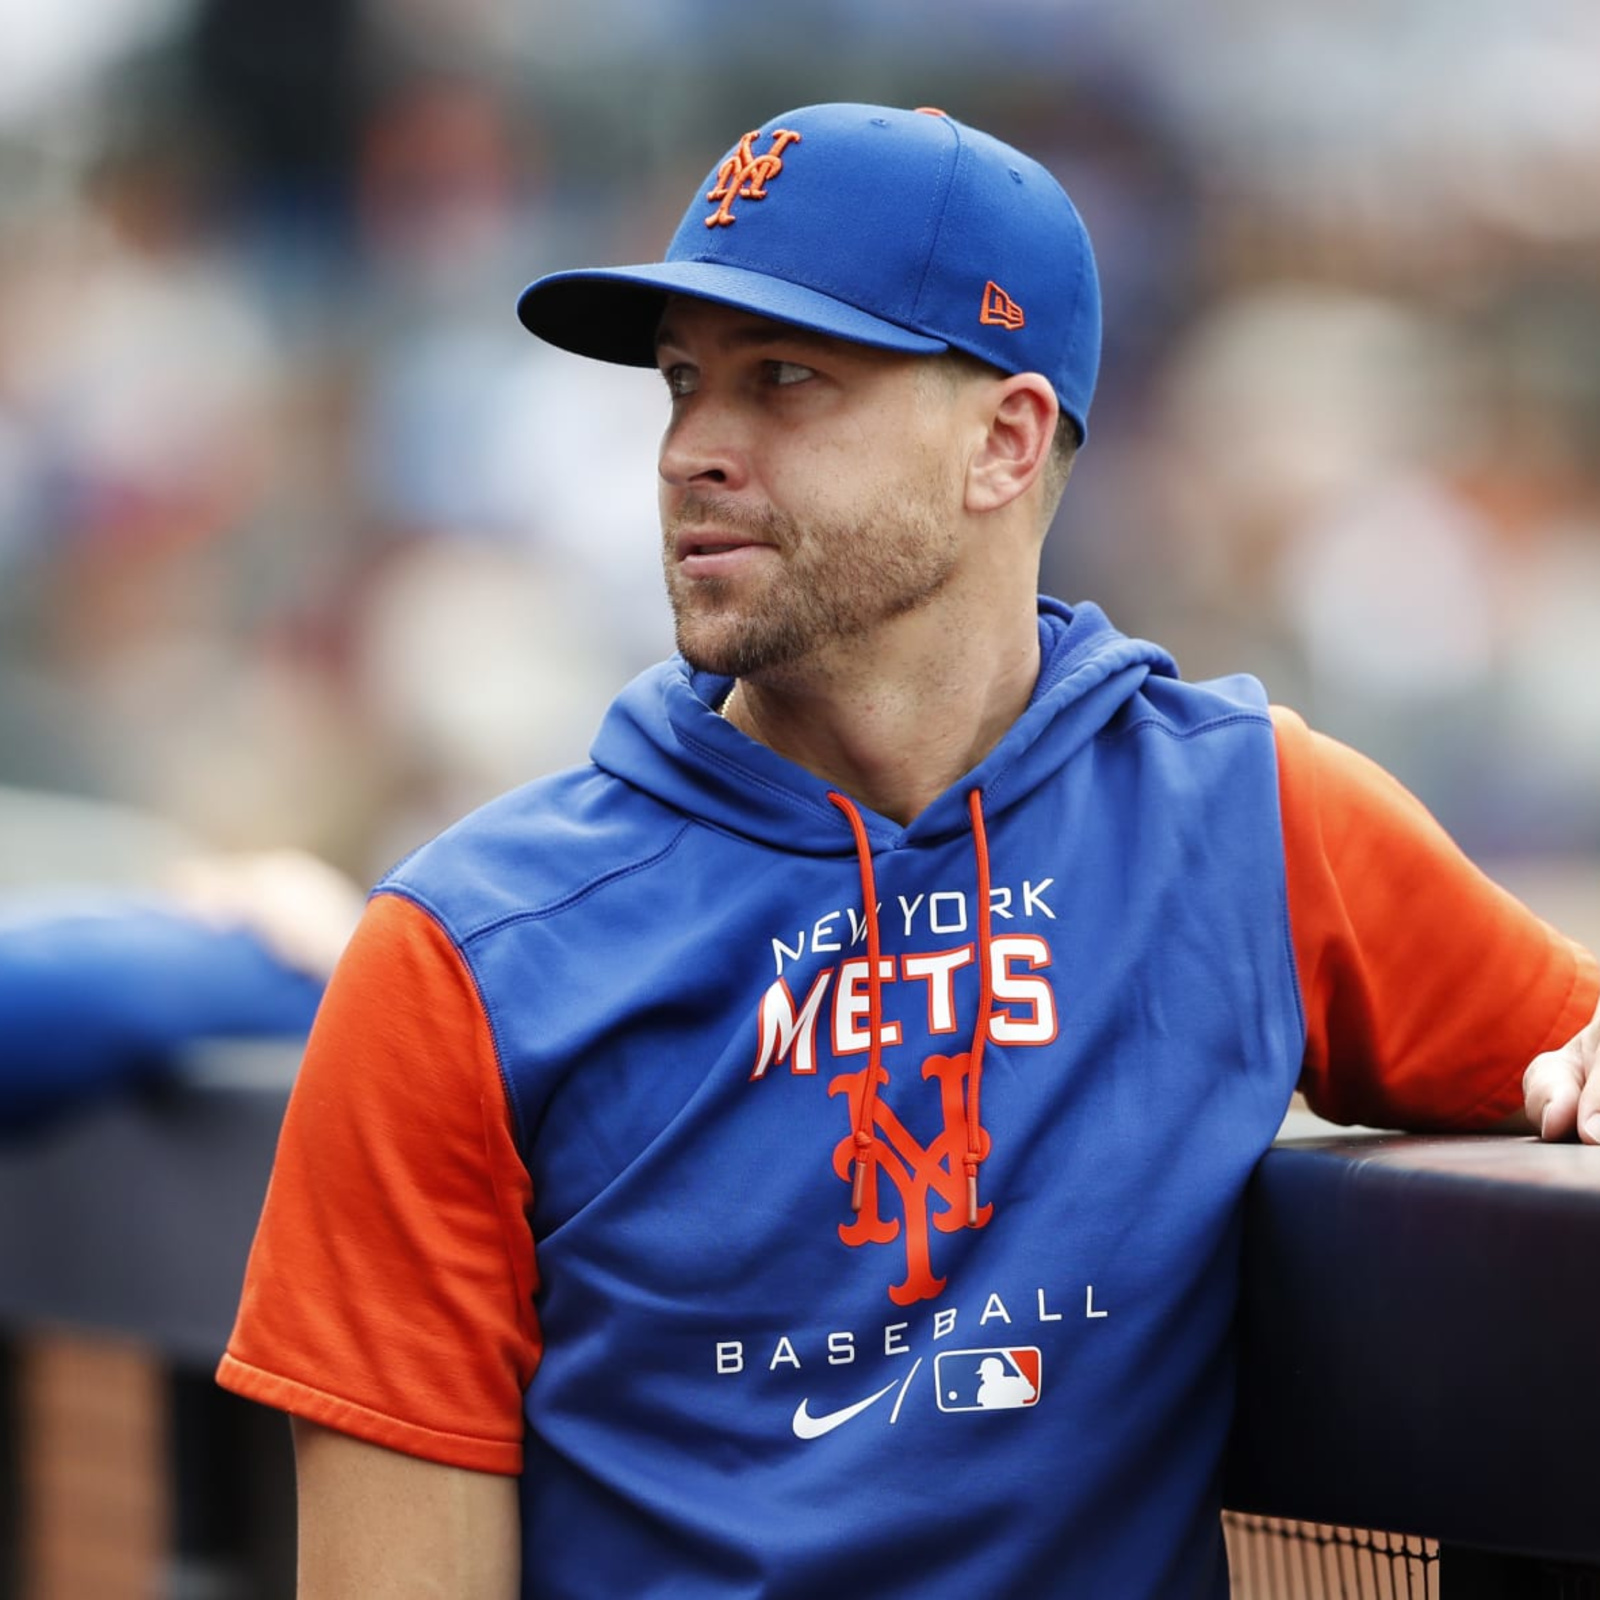 New York Mets roster and schedule for 2020 season - NBC Sports